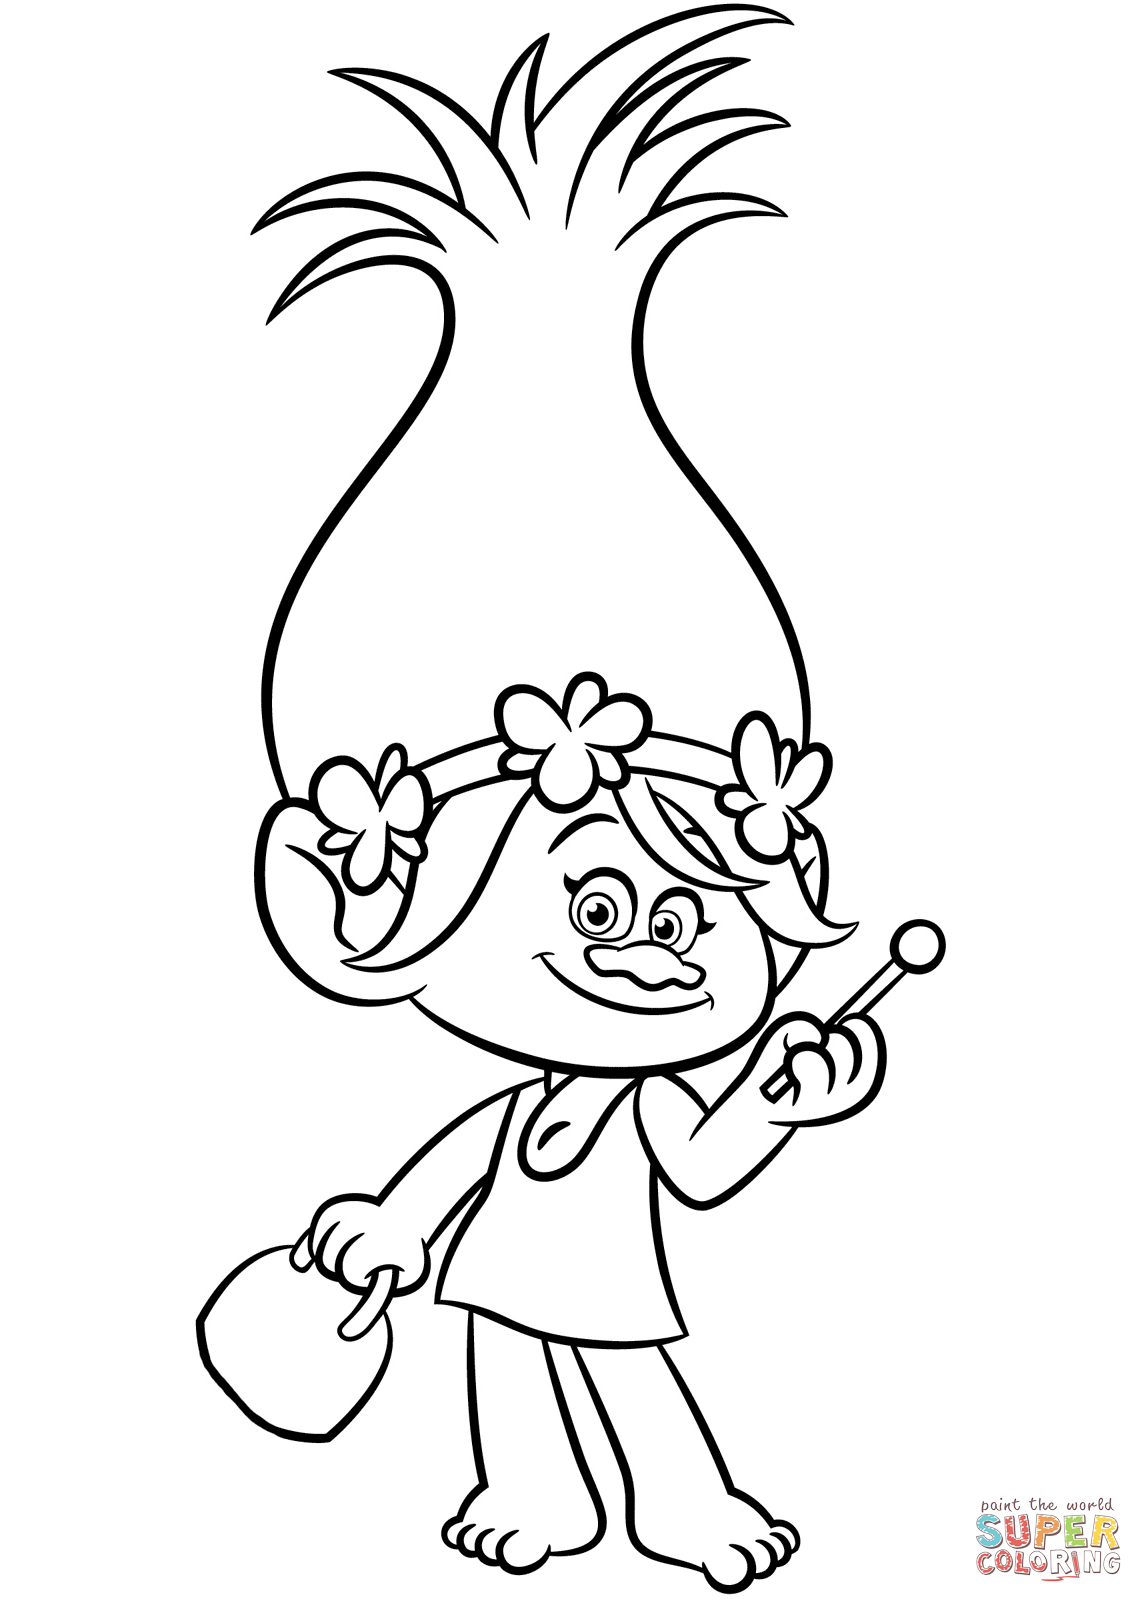 Poppy From Trolls Coloring Page | Free Printable Coloring Pages - Free Printable Troll Coloring Pages